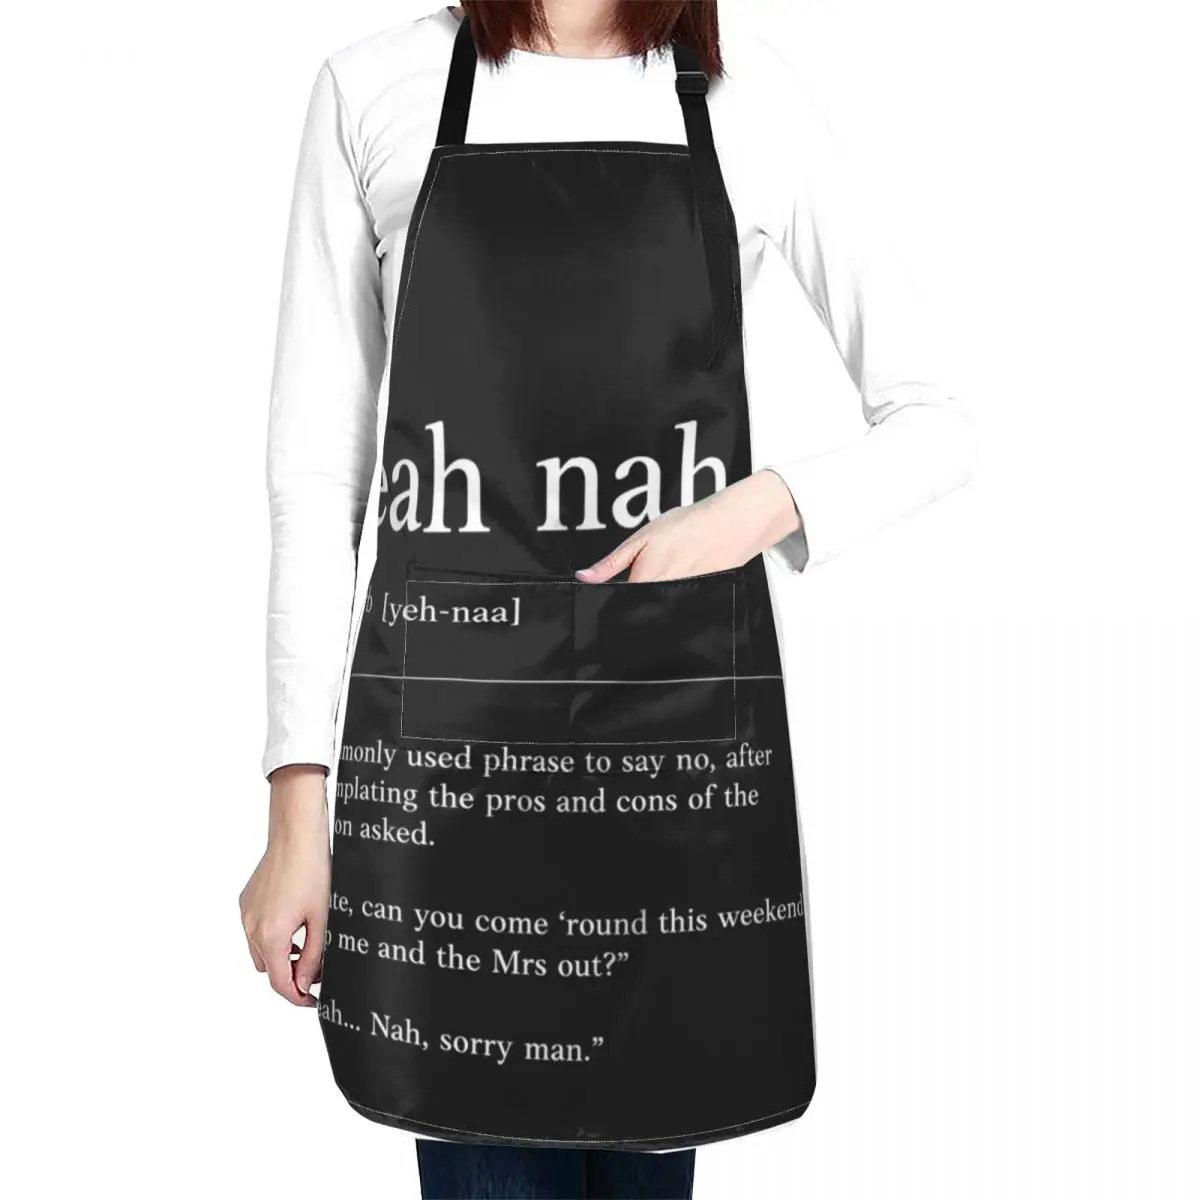 

Yeah nah White text on Black Funny Australian slang, phrase and humor definition Apron Chef jacket men Kitchen Things